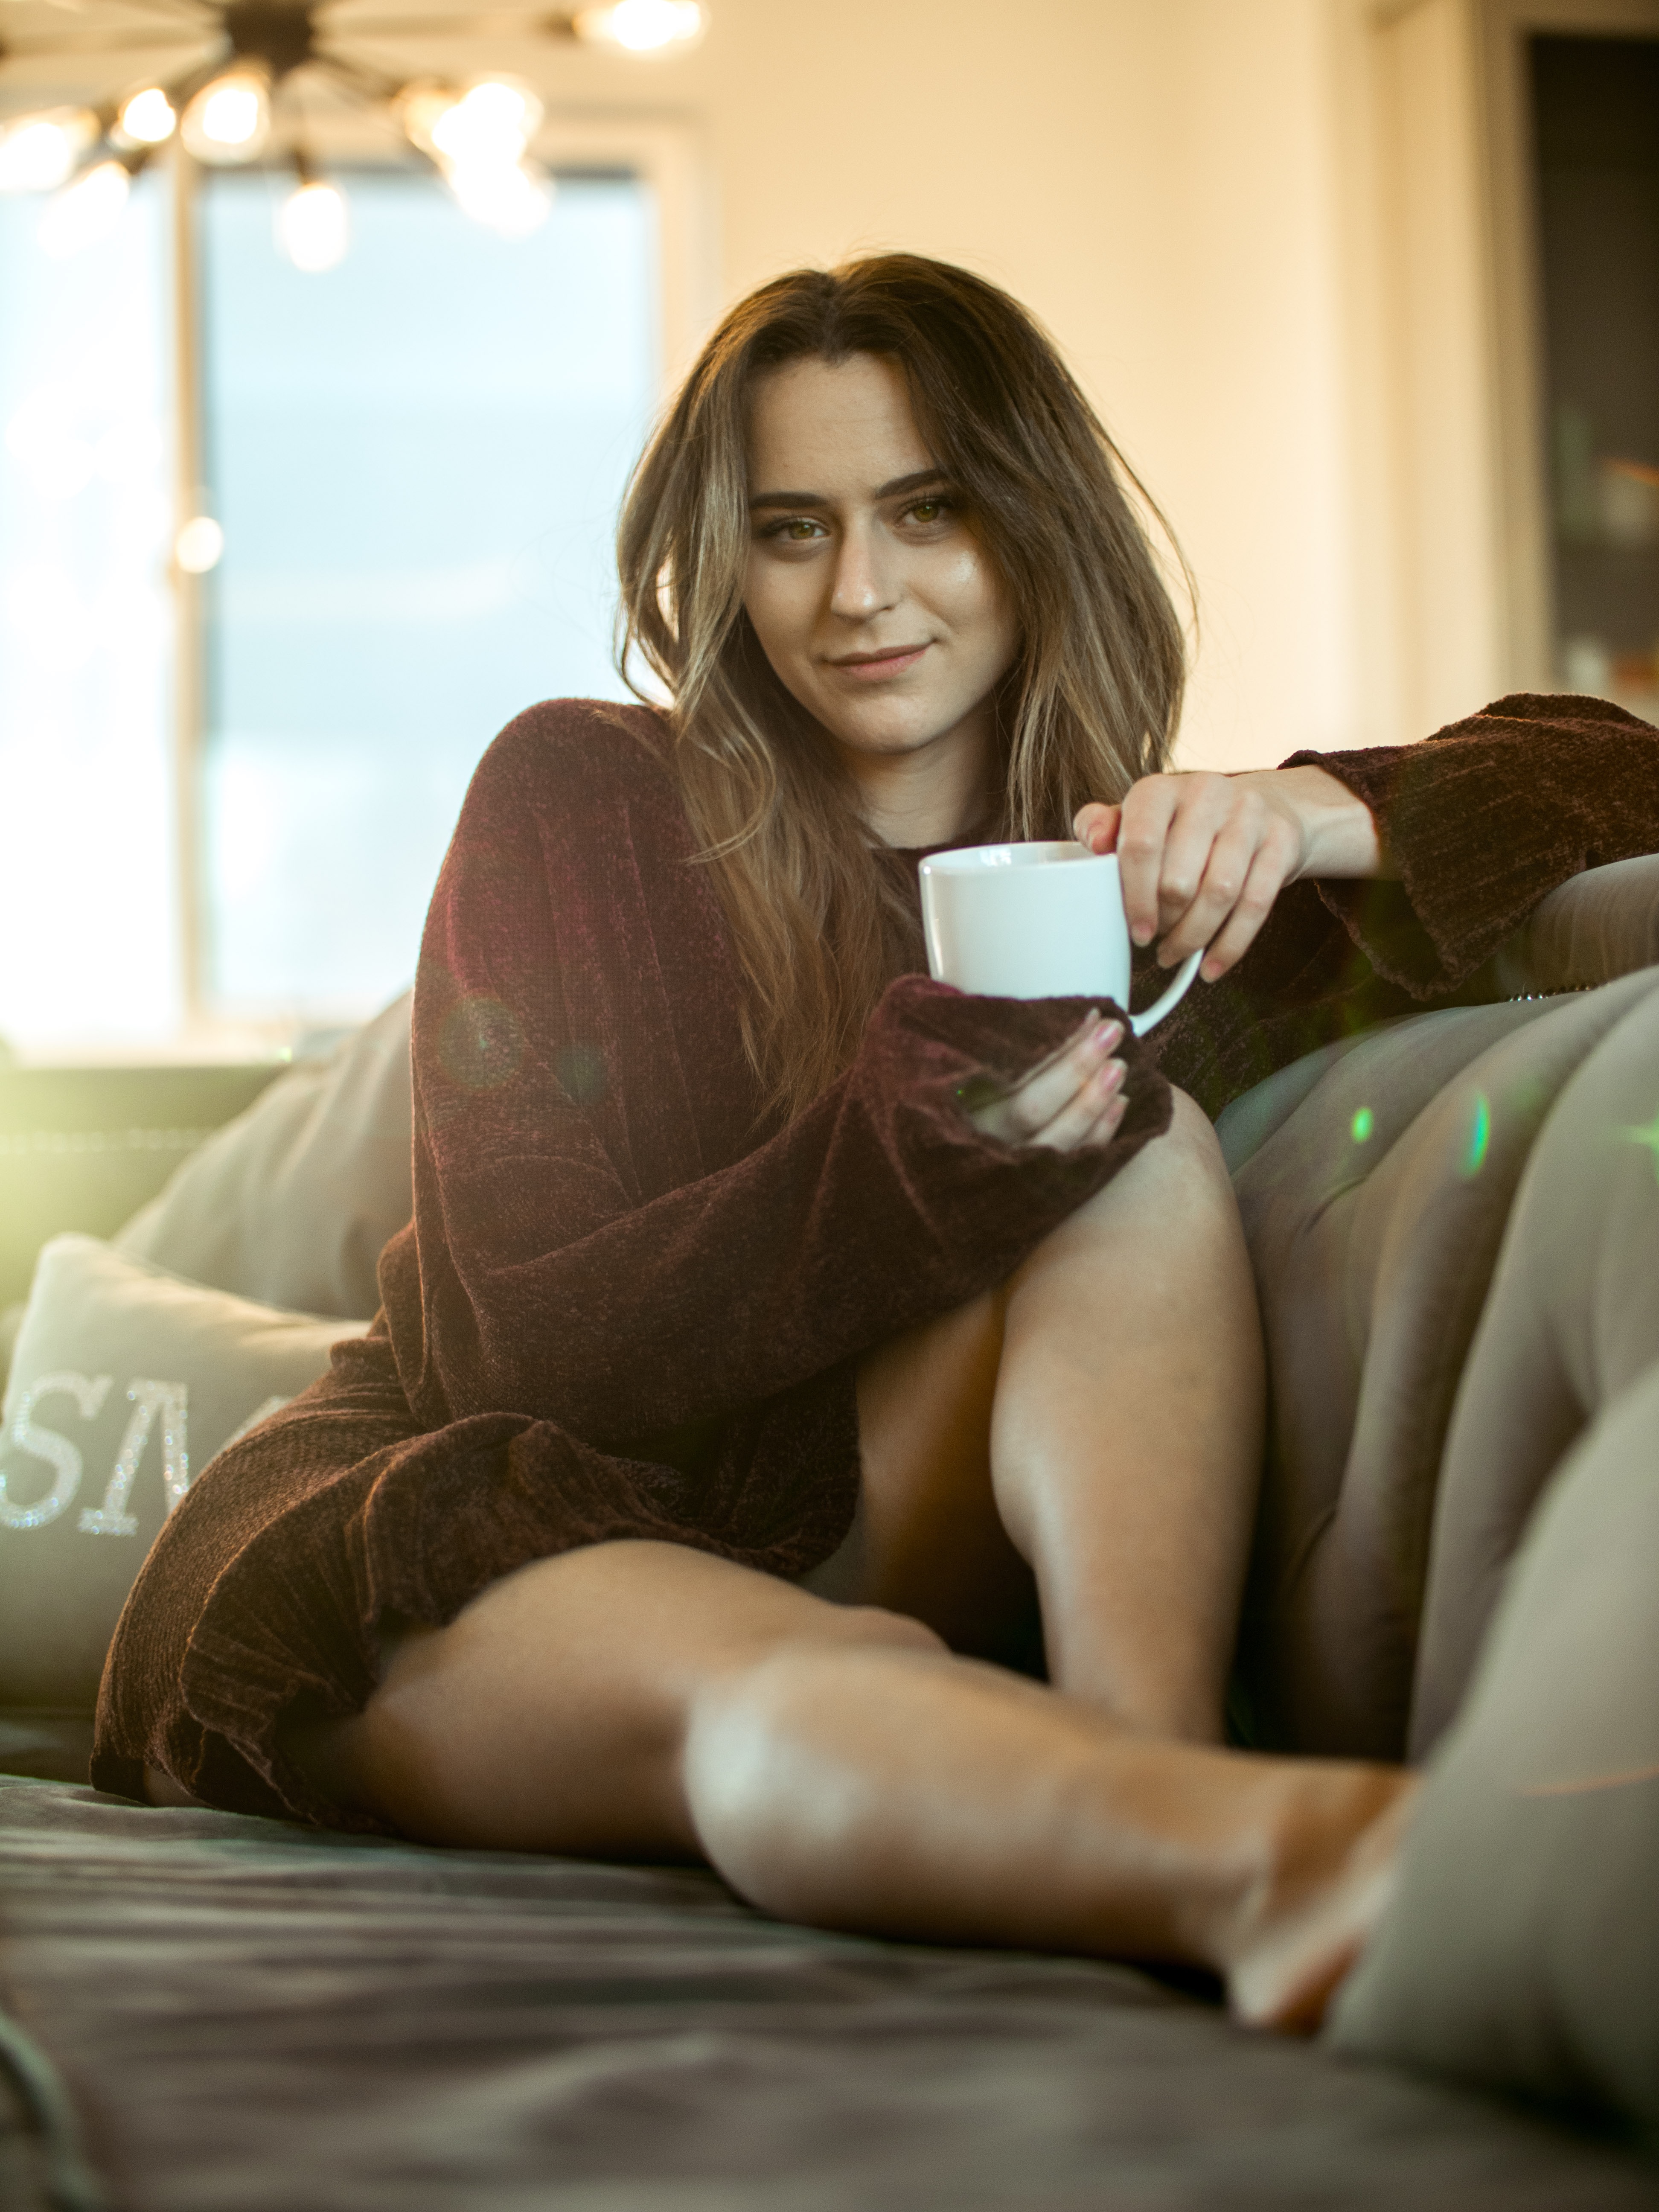 A woman sitting on a couch. | Source: Unsplash